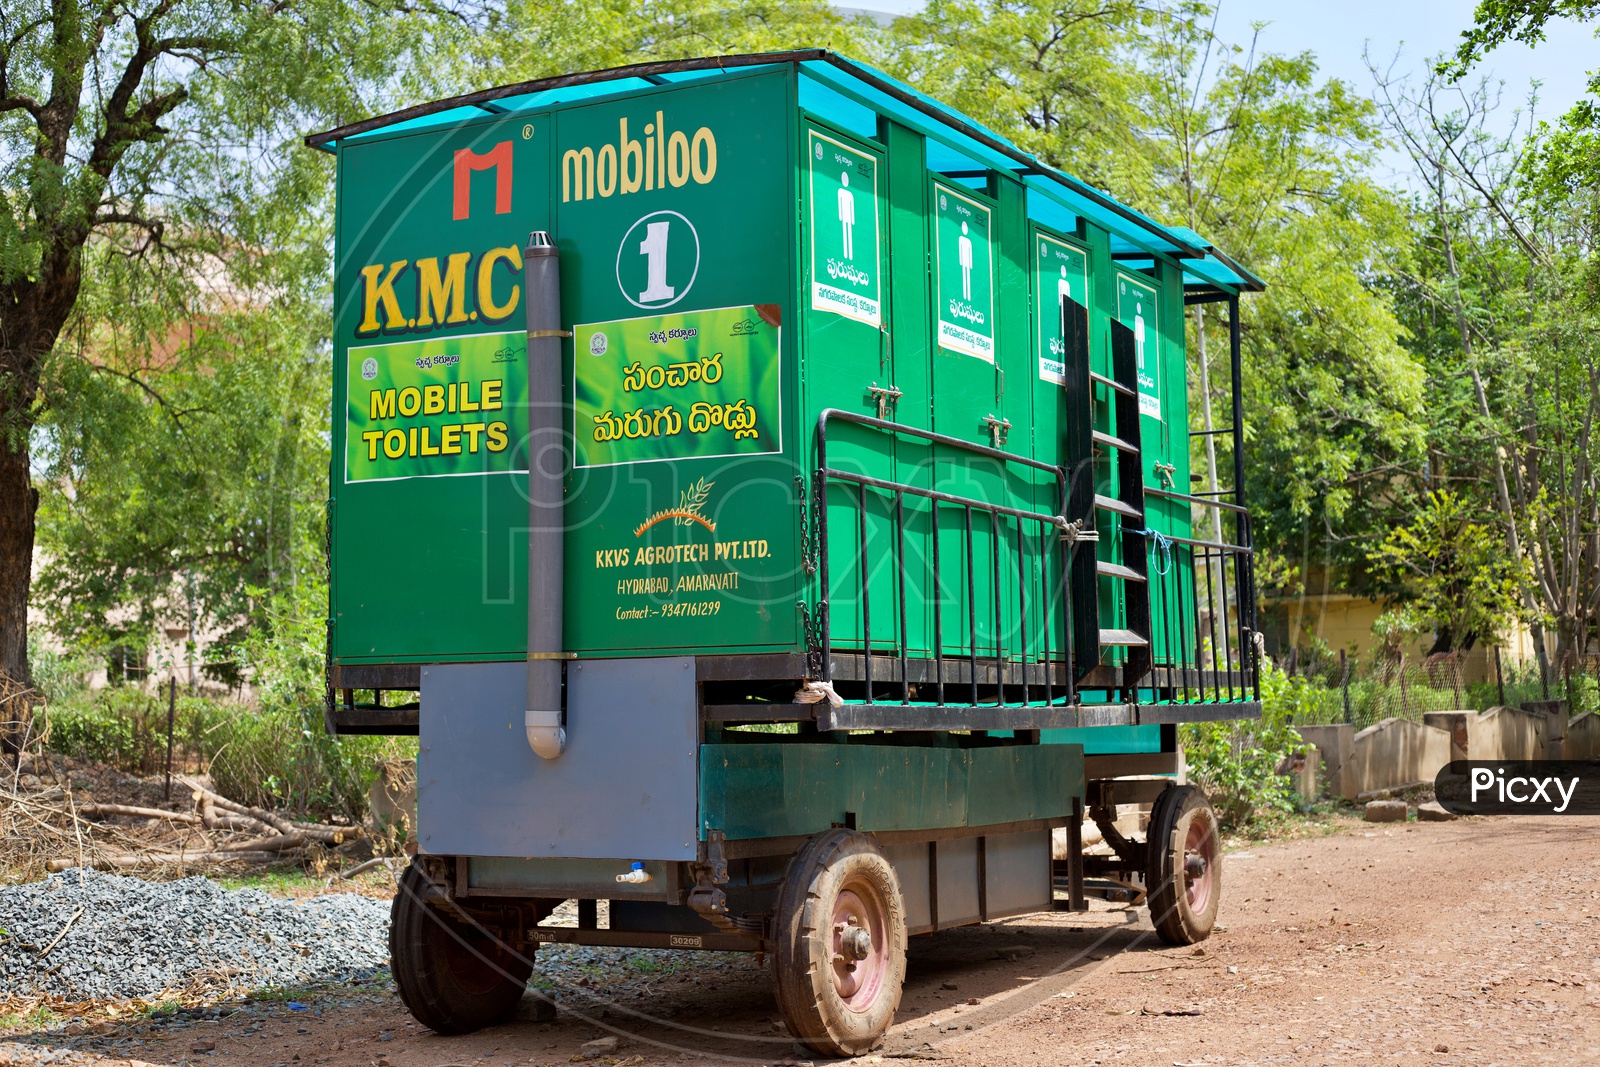 Mobile toilets issued by Kurnool Municipal Corporation.